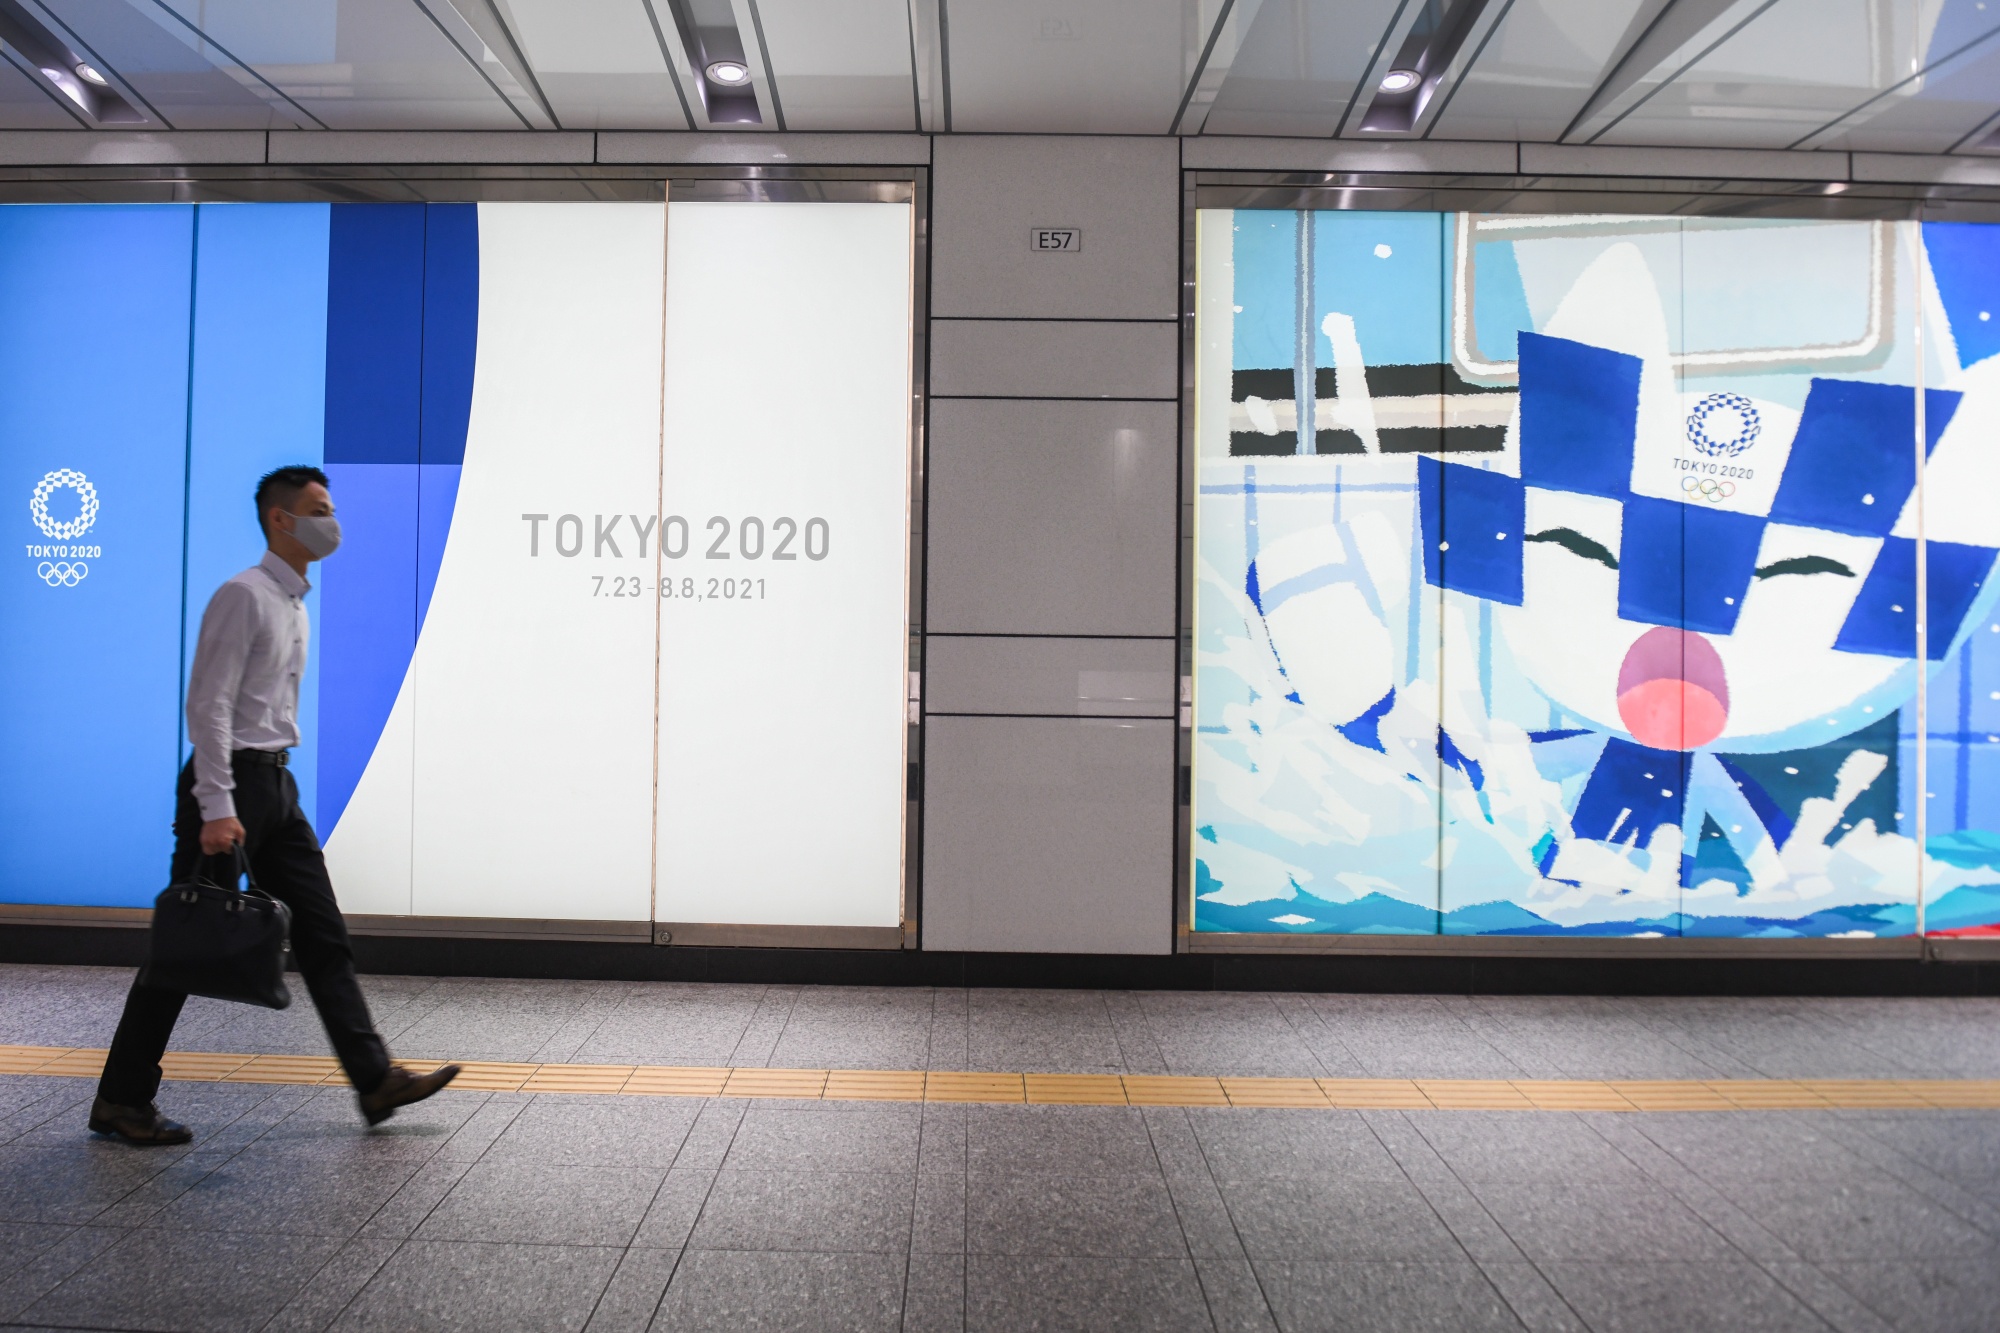 A pedestrian walks past a sign promoting the Tokyo 2020 Olympic Games near Shinjuku station in Tokyo, Japan, on Friday, June 18, 2021. 